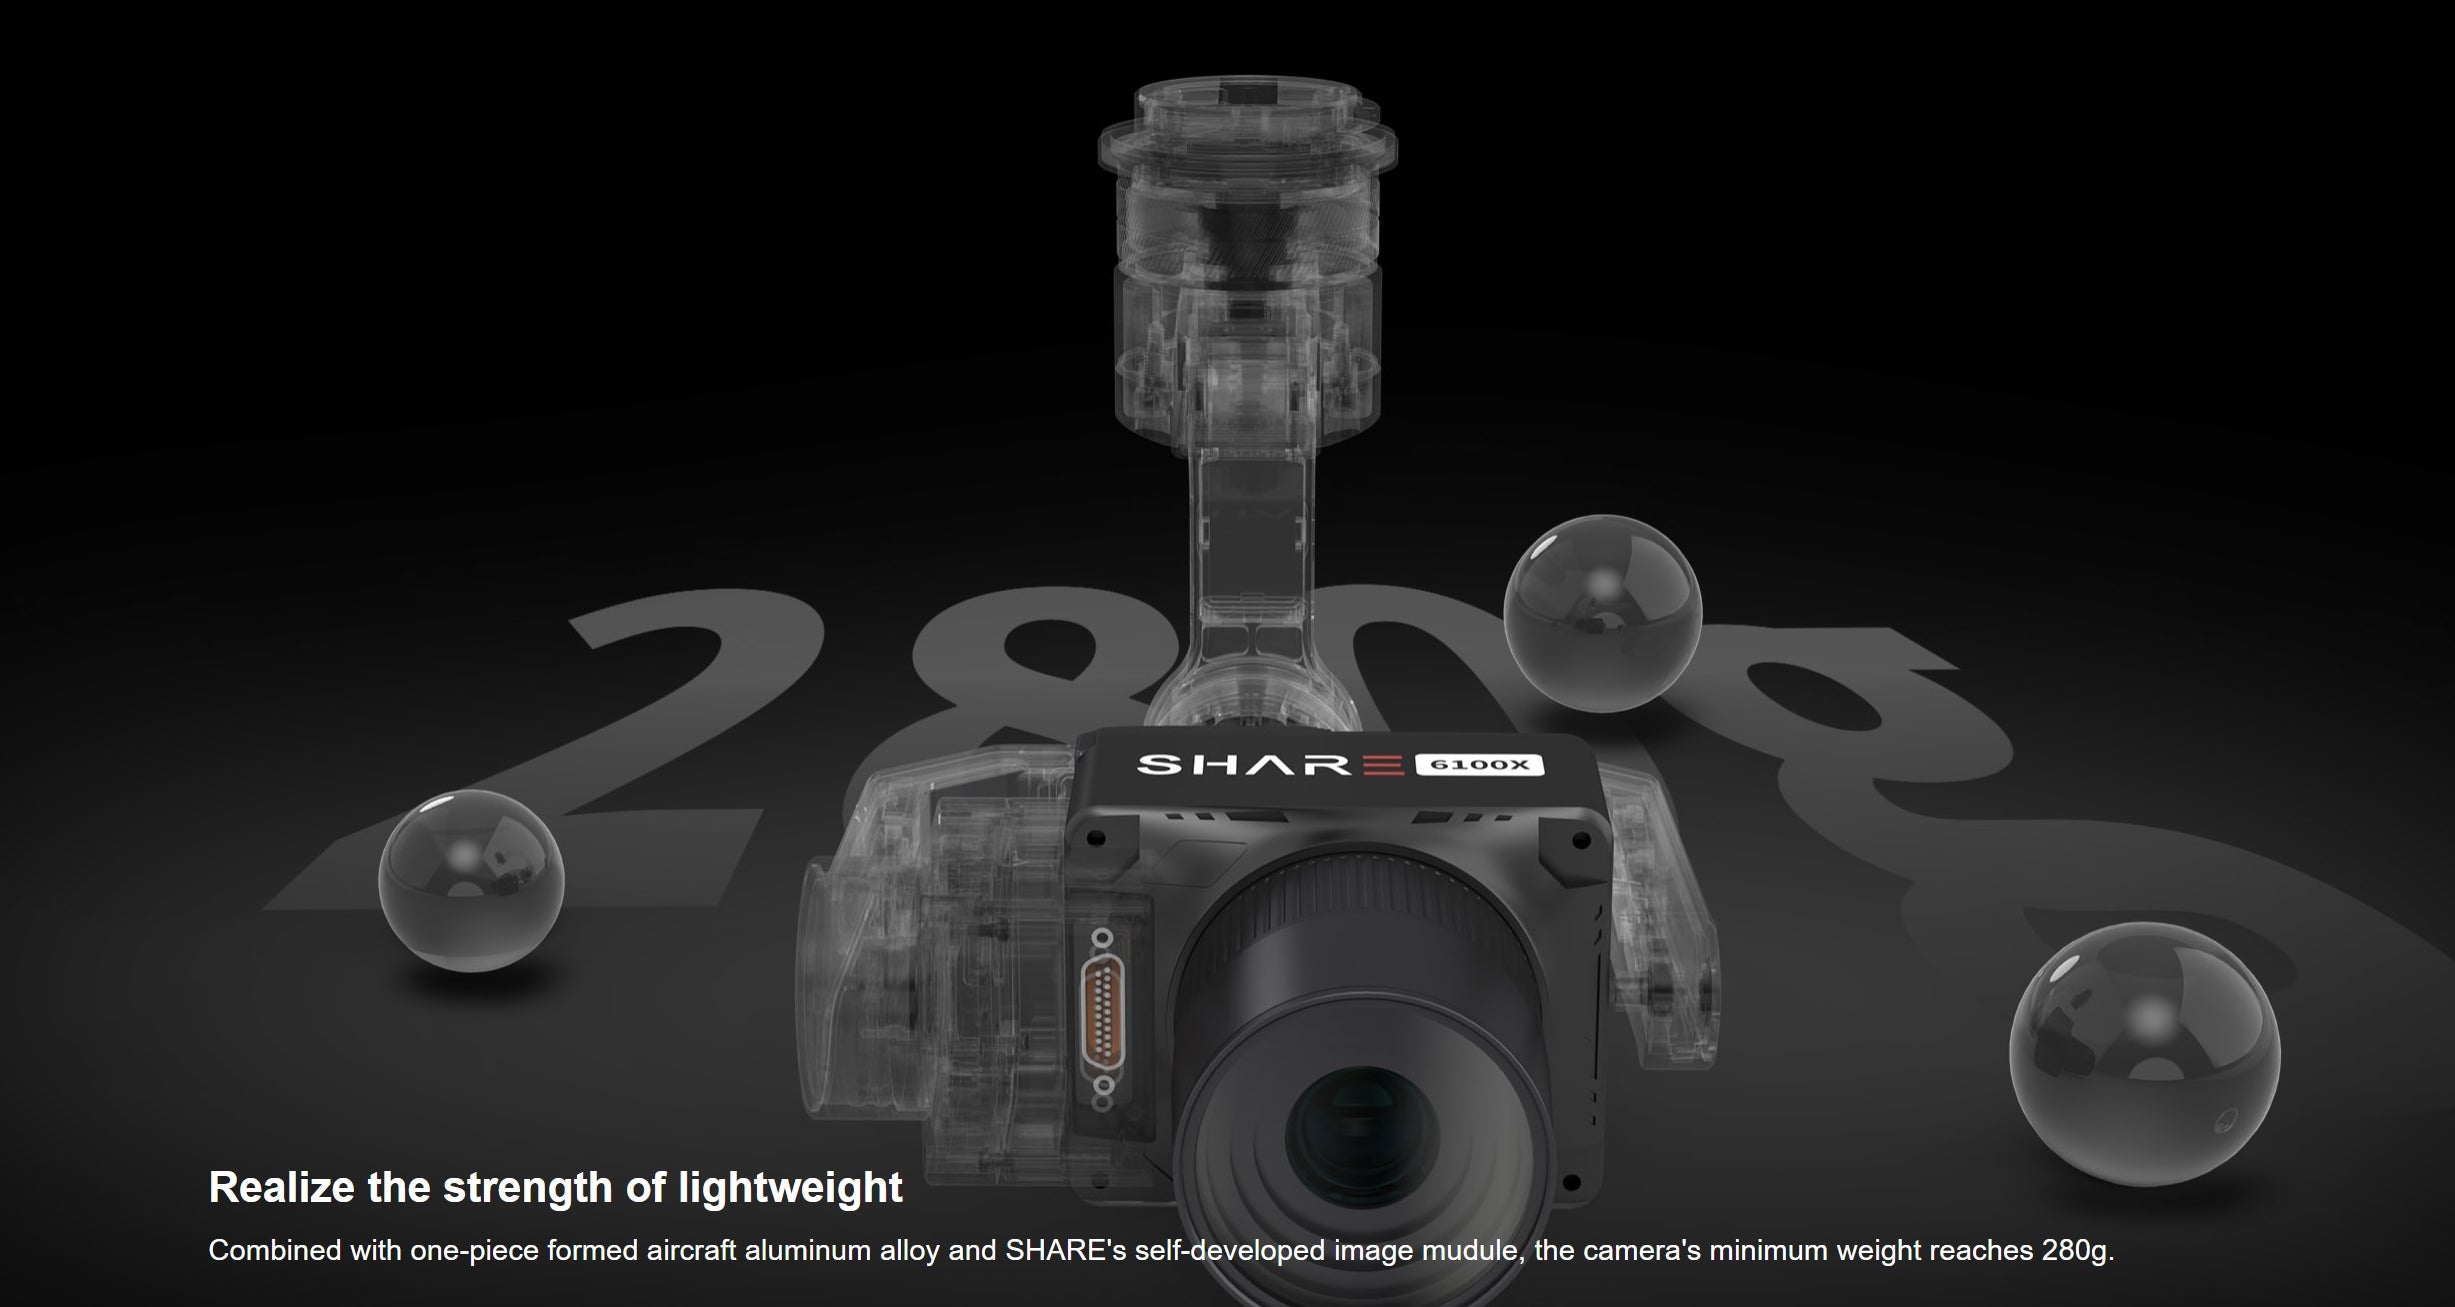 SHARE 6100X: Lightweight camera with single-piece aluminum alloy structure and proprietary module for aerial photography and modeling.